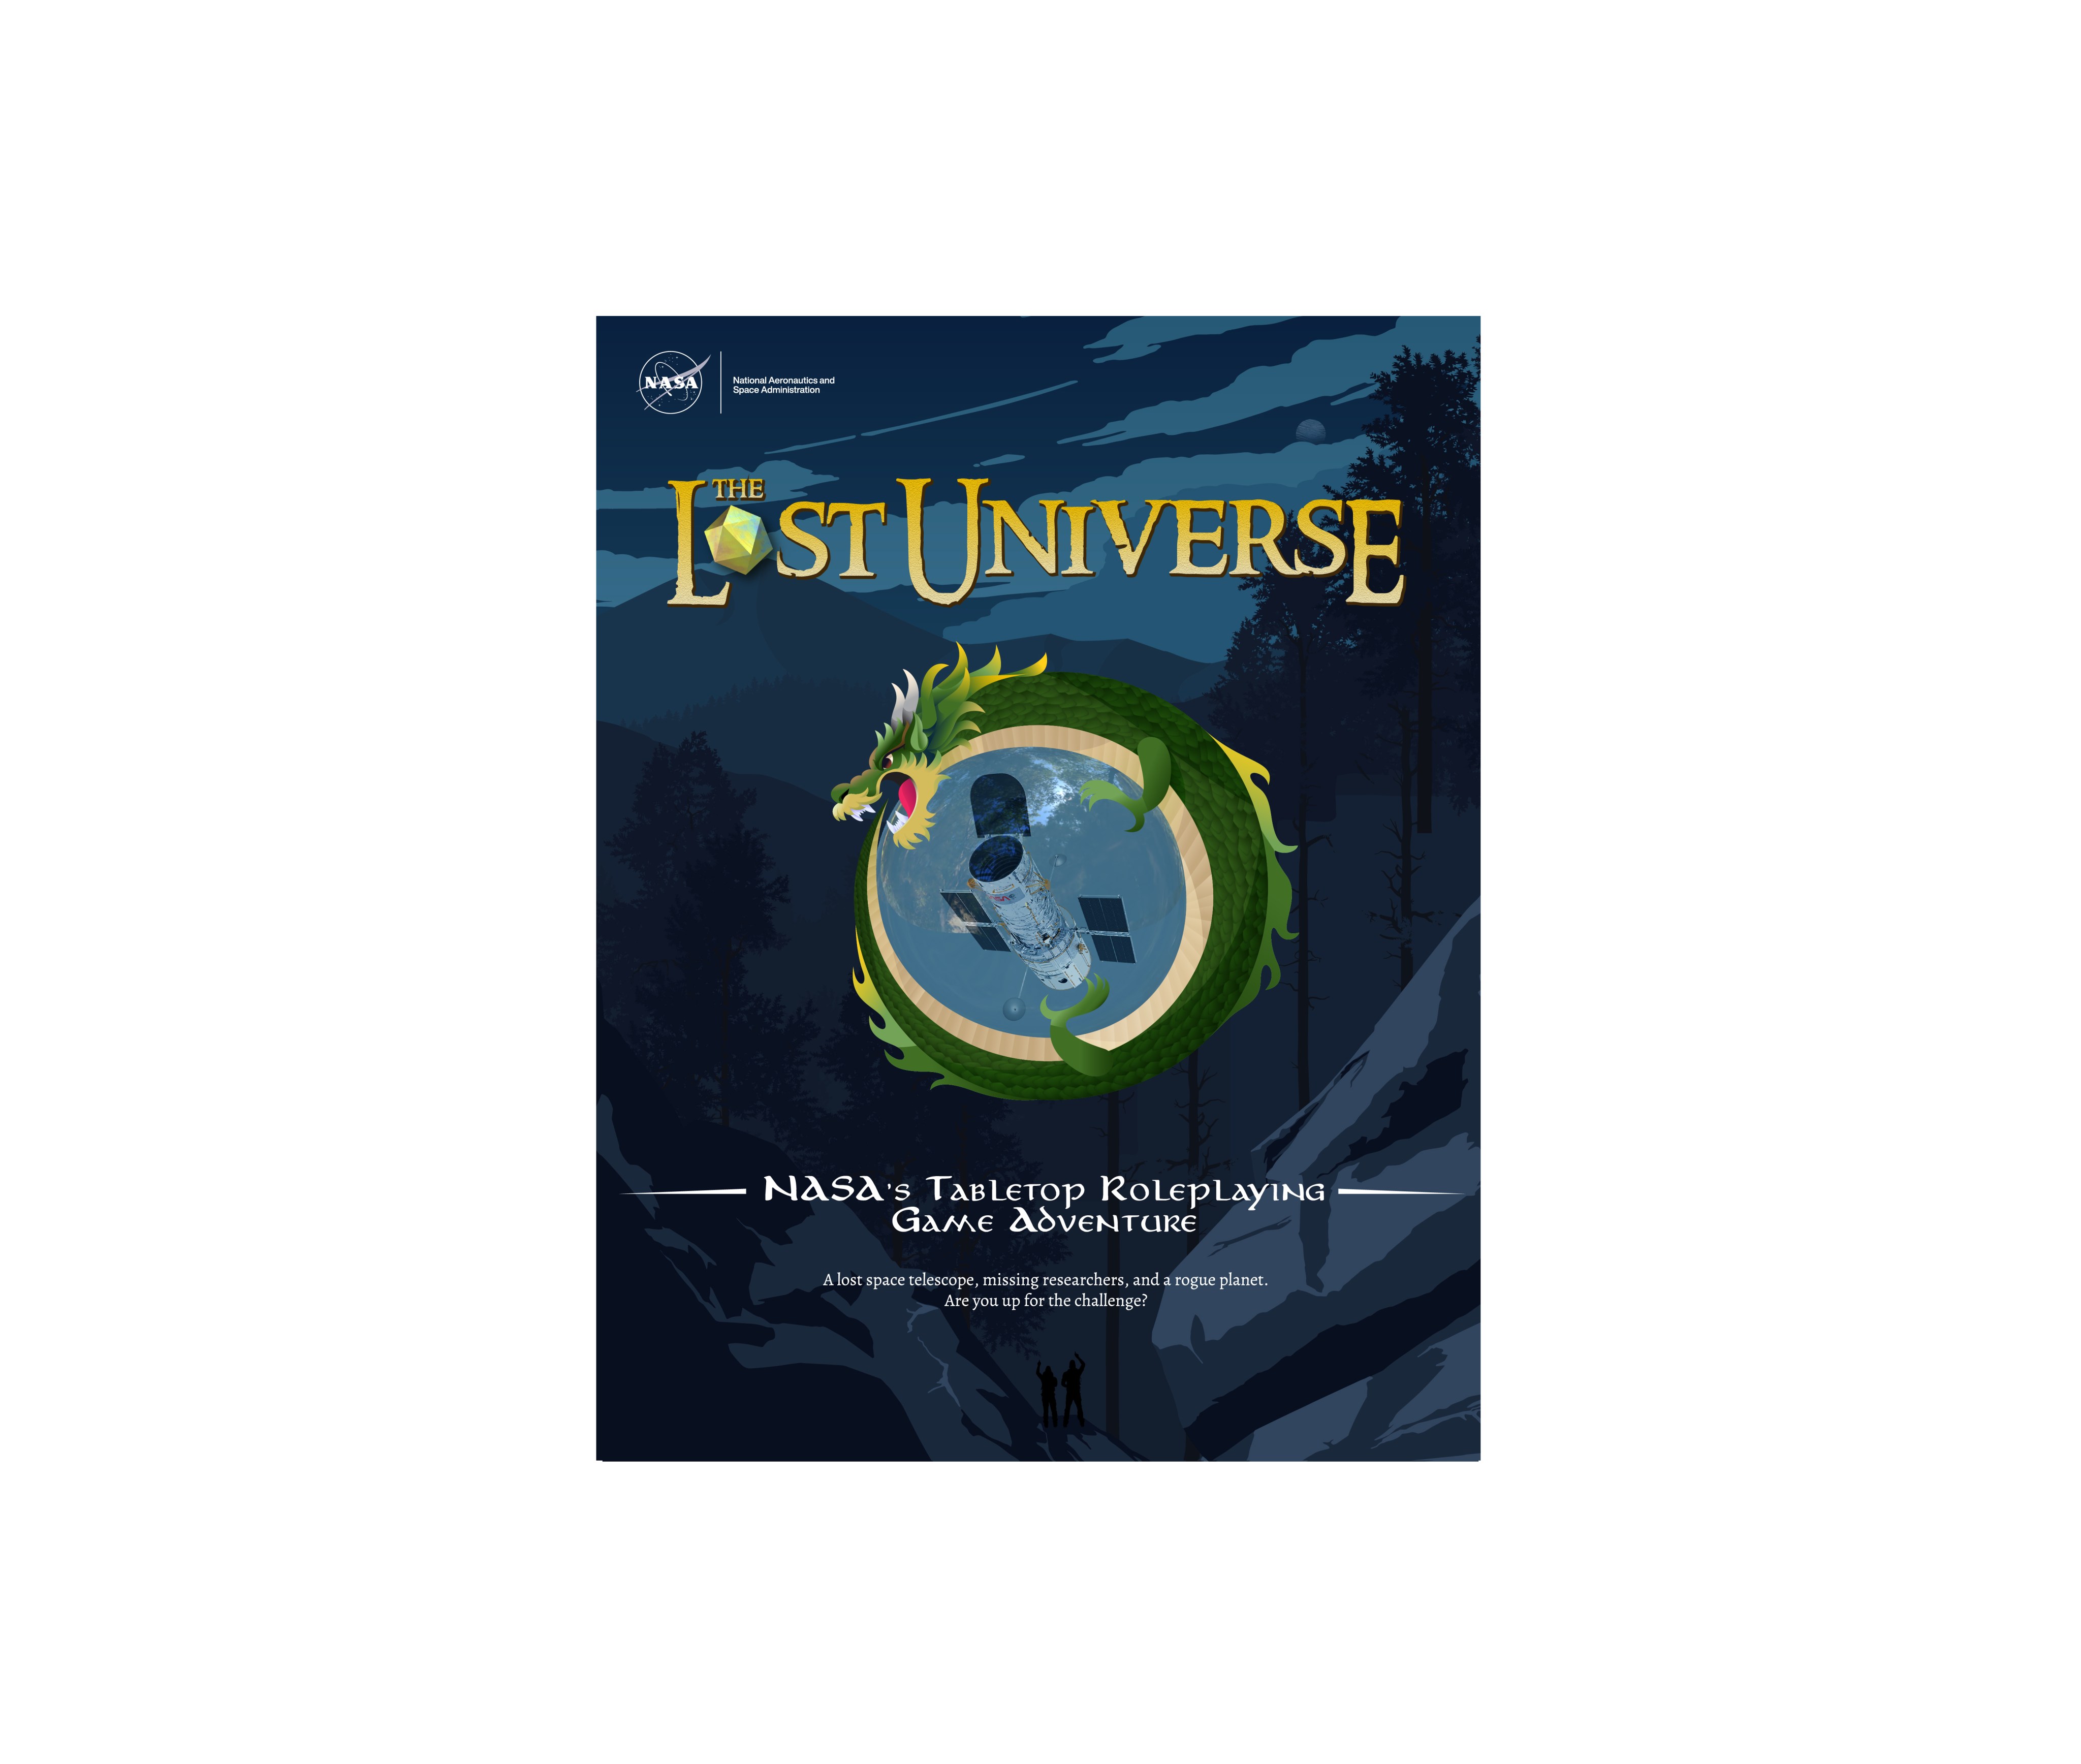 Illustration Title: "The Lost Universe" in yellow at the top of the page. A green, yellow, and beige dragon is wrapped around an illustration of the Hubble Space Telescope. The image background is in various shades of blue and black and depicts a dark forest with trees in black silhouette.